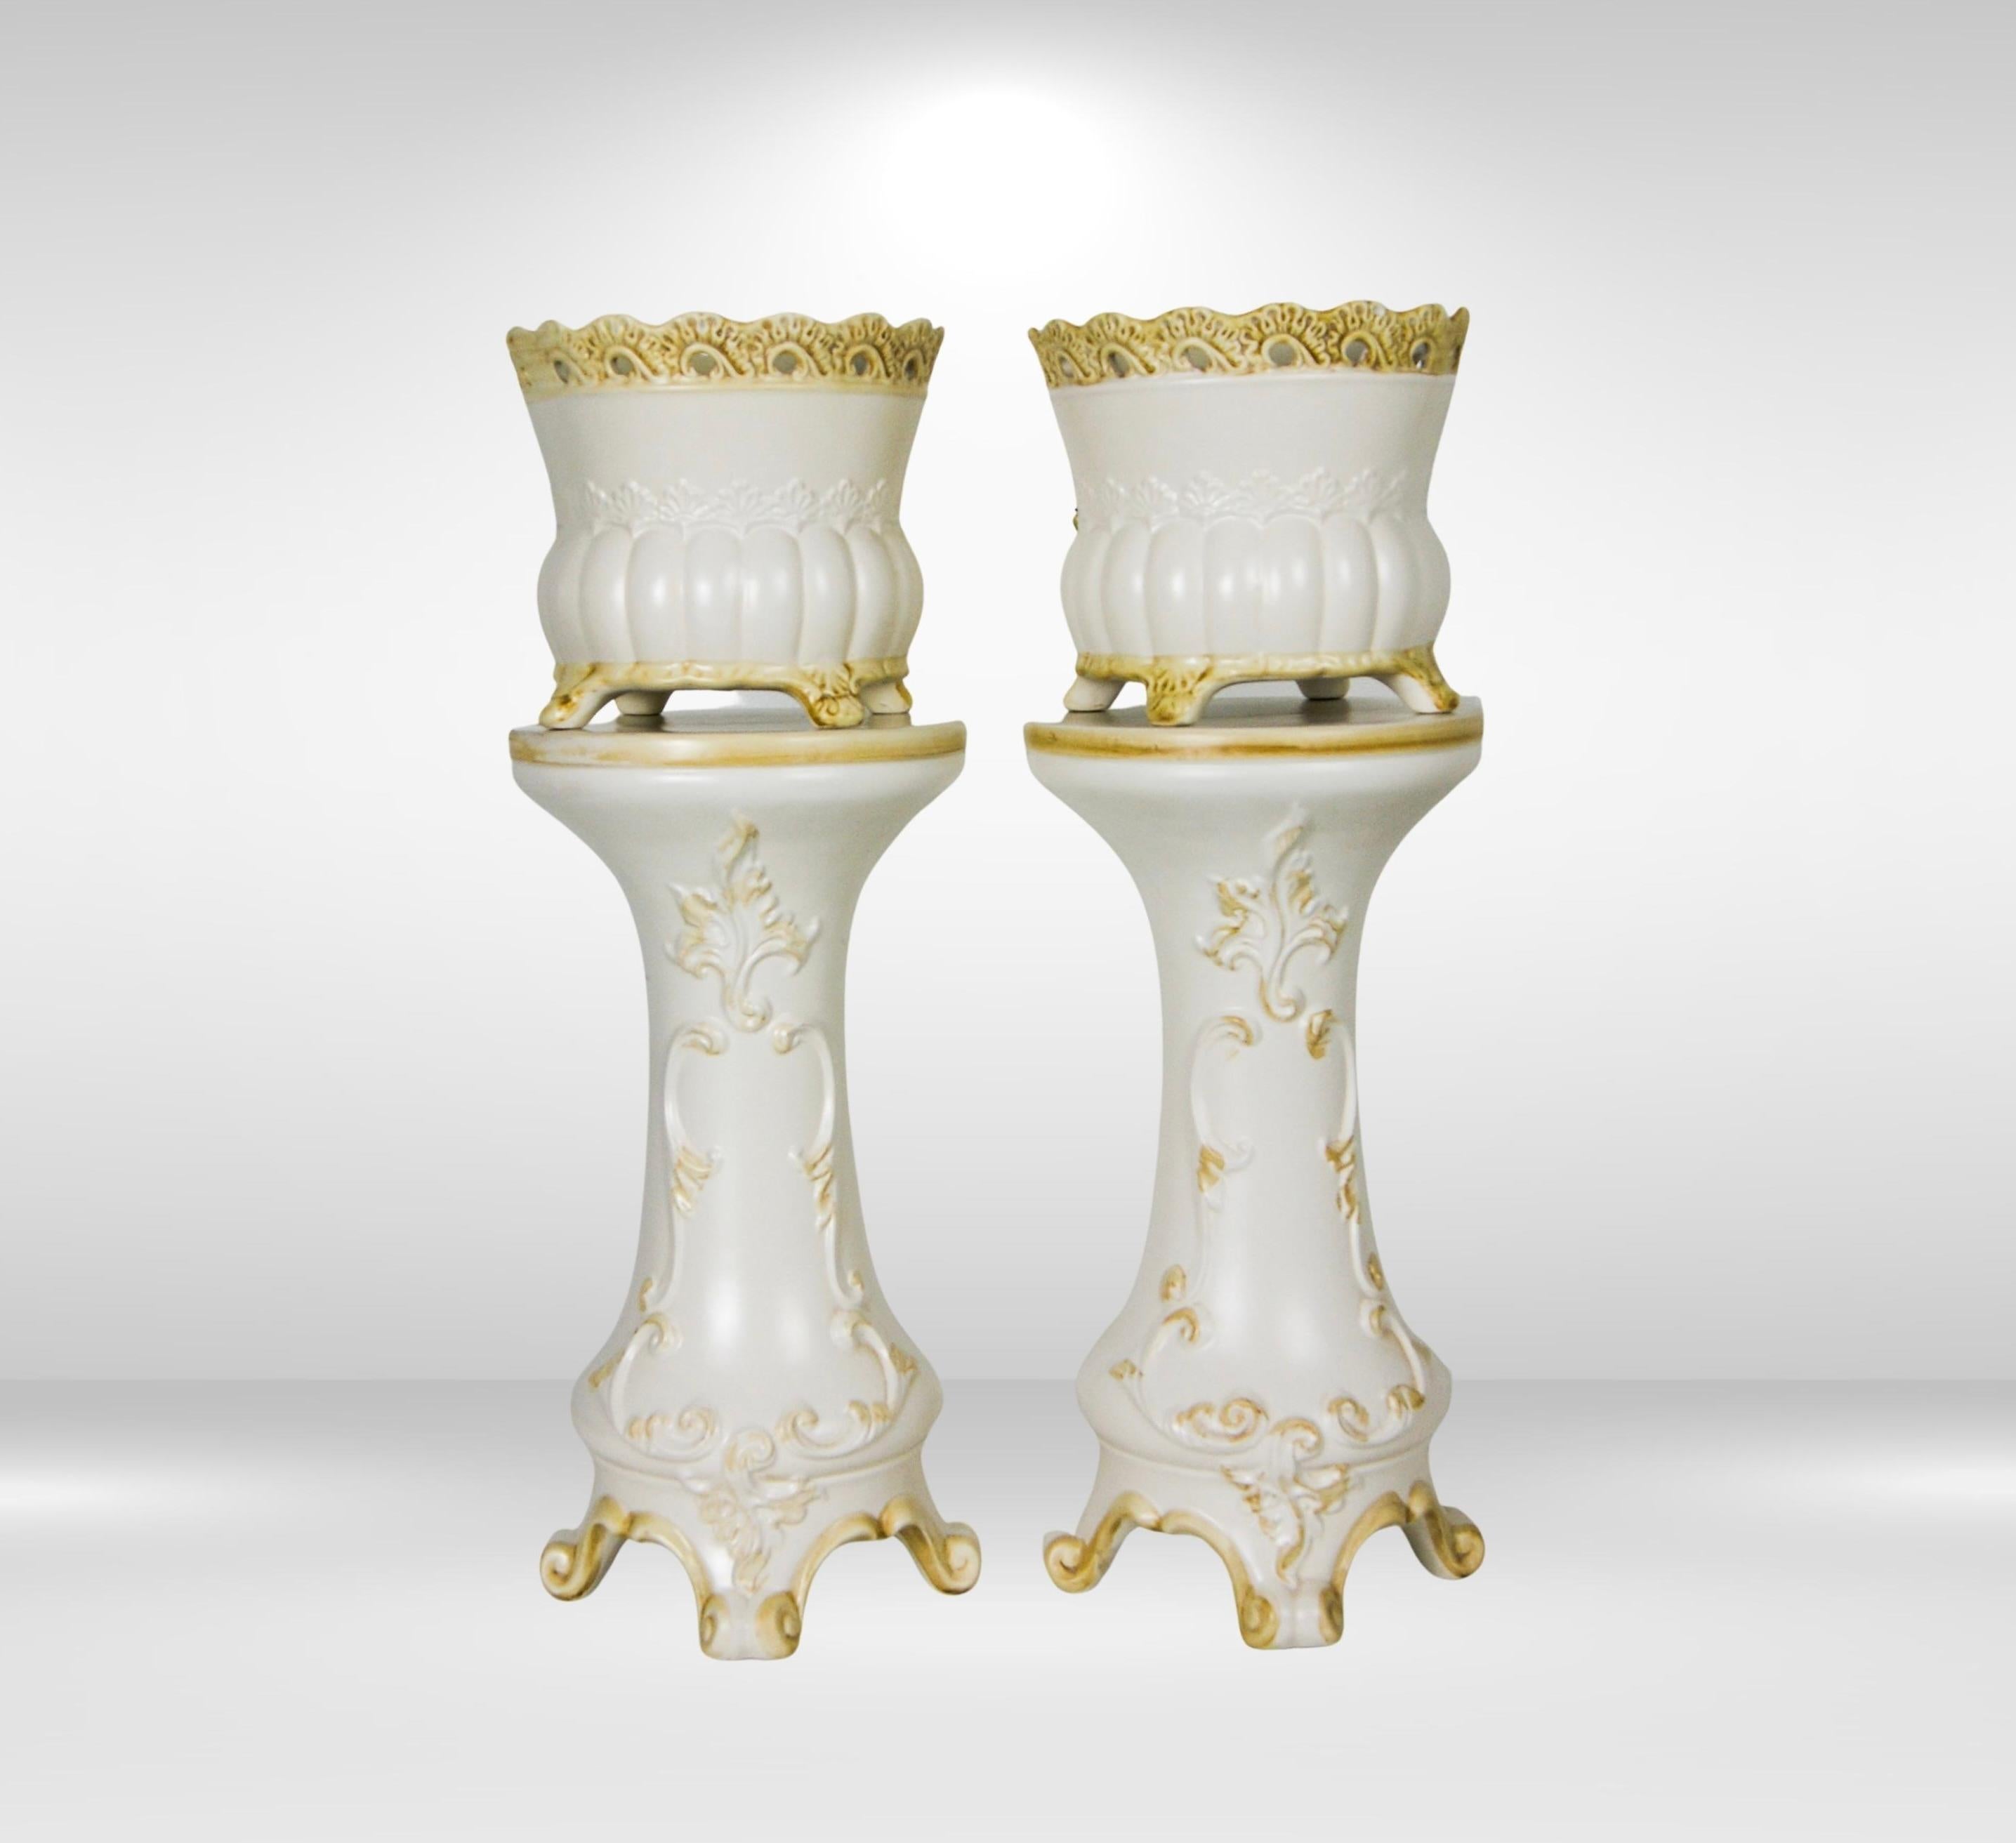 Mid-century pair of Jardiniere planters & matching tall pedestal stands by Capo di Monte Italy.
Two ceramic flower pots with two matching tall pedestal stands, in colour creamy white with pale gold baroque motif details.
Both jardinieres and